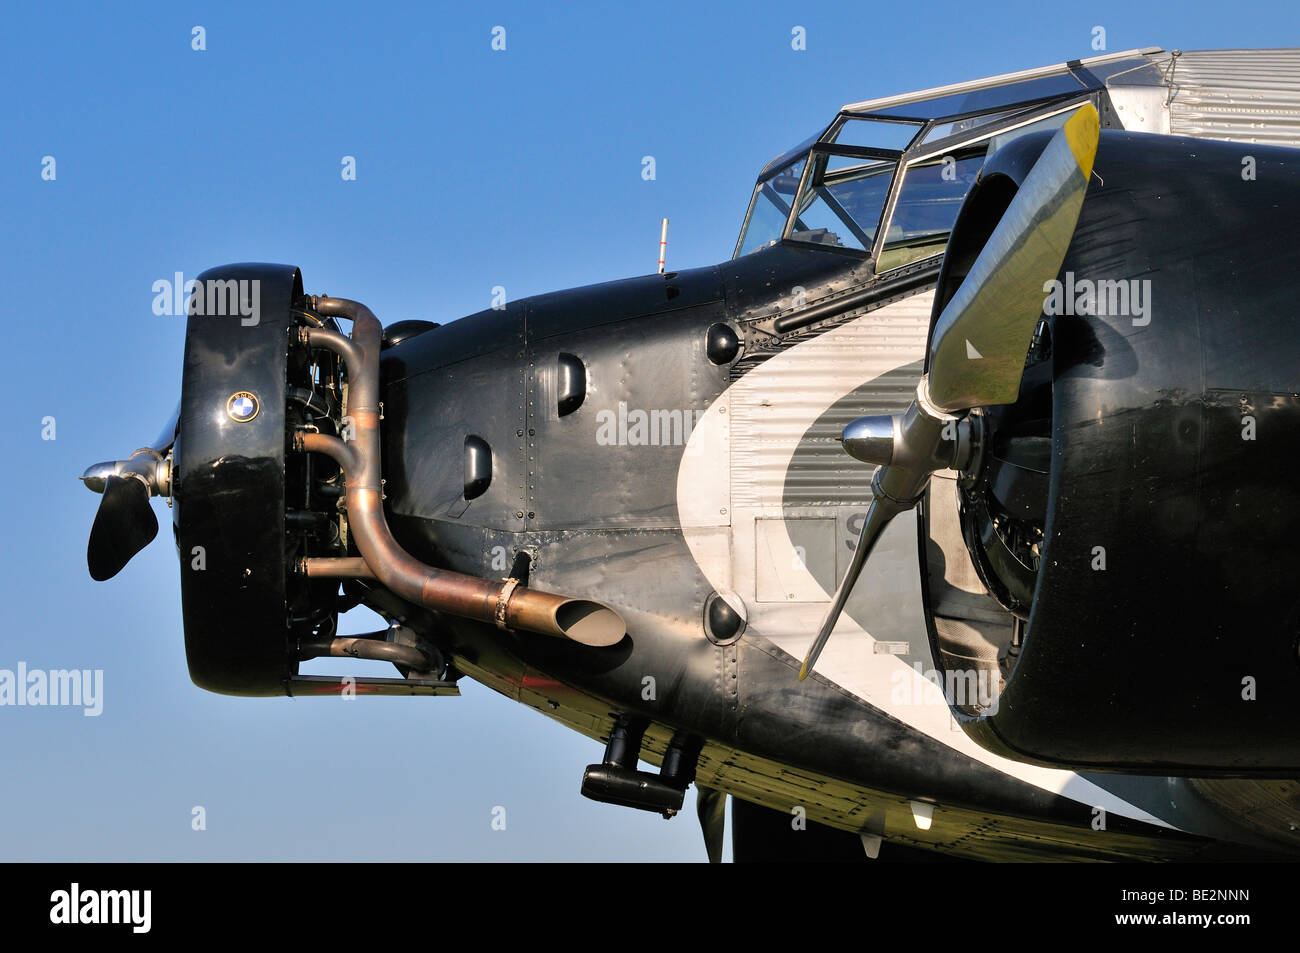 Detail of the passenger aircraft Junkers JU-52, Germany, Europe Stock Photo